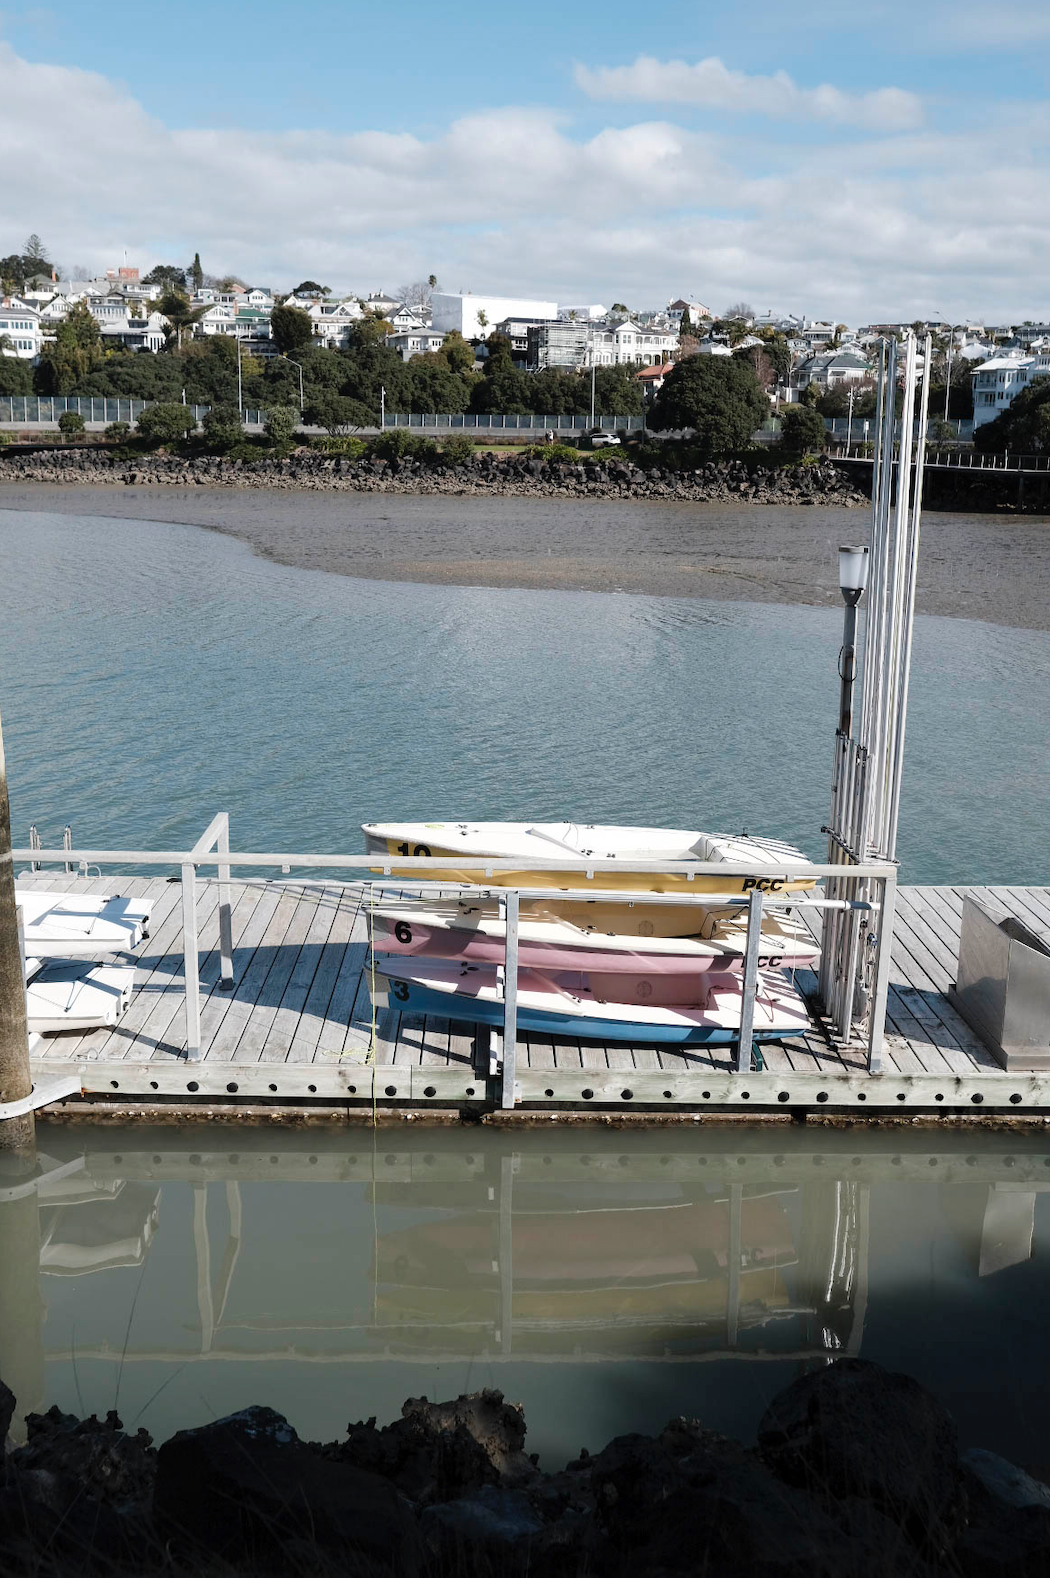 Looking down to a dock at Westhaven Marina in Auckland. On the dock there are 3 small pastel coloured beginners yachts stacked on top of each other – blue, yellow, pink. The colouring of the picture is undersaturated, so the blue sky and browny marina water are a bit dull. 